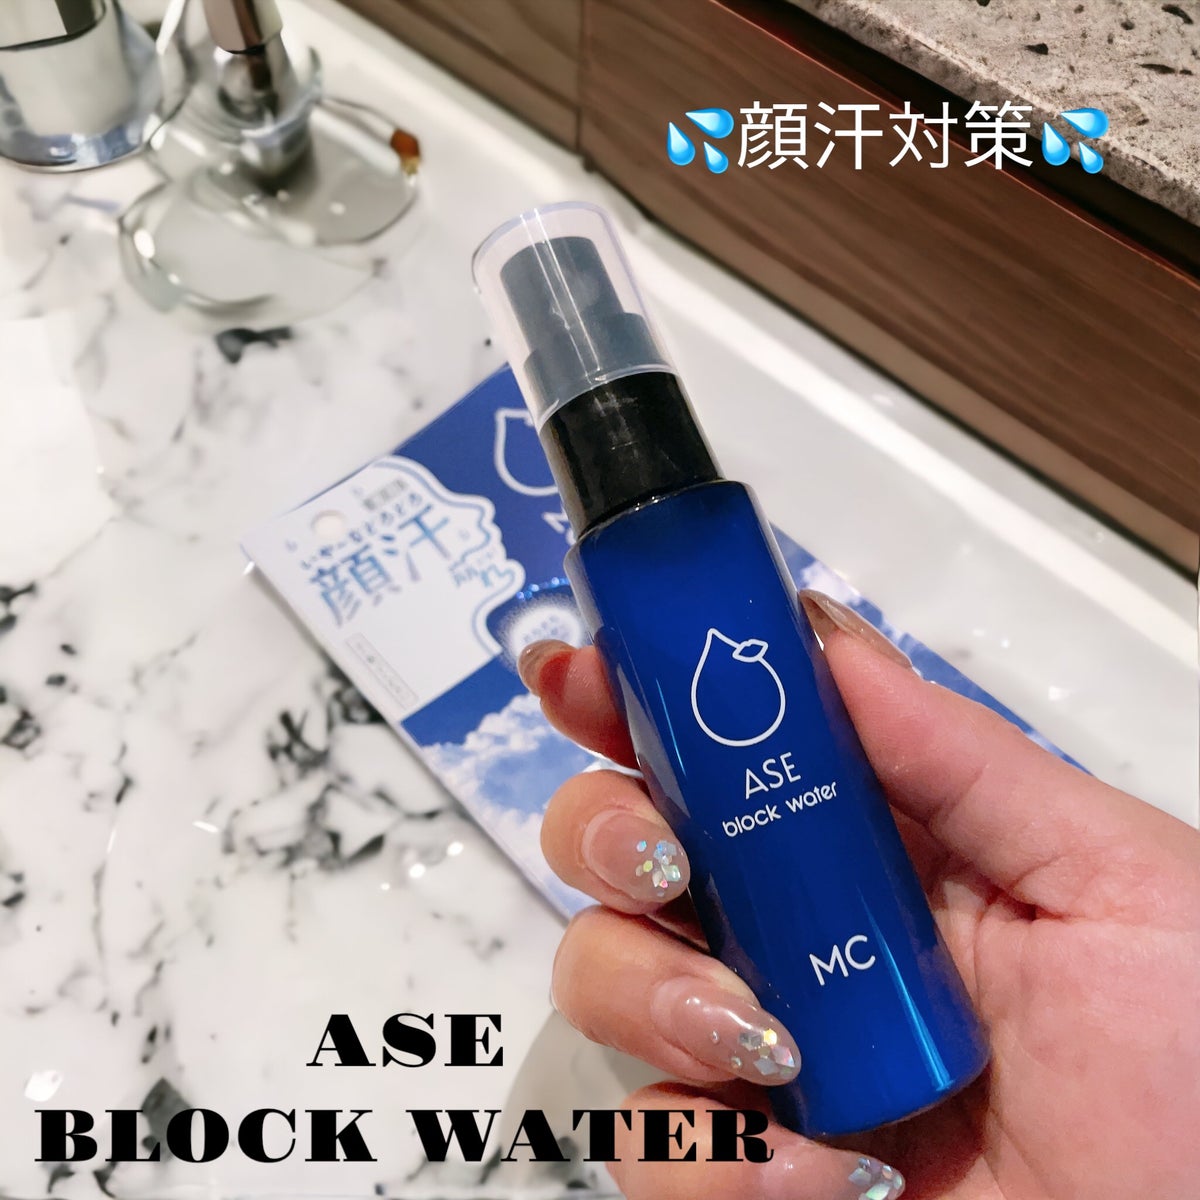 ASE BLOCK WATER/MAKE COVER/ミスト状化粧水 by M★chi